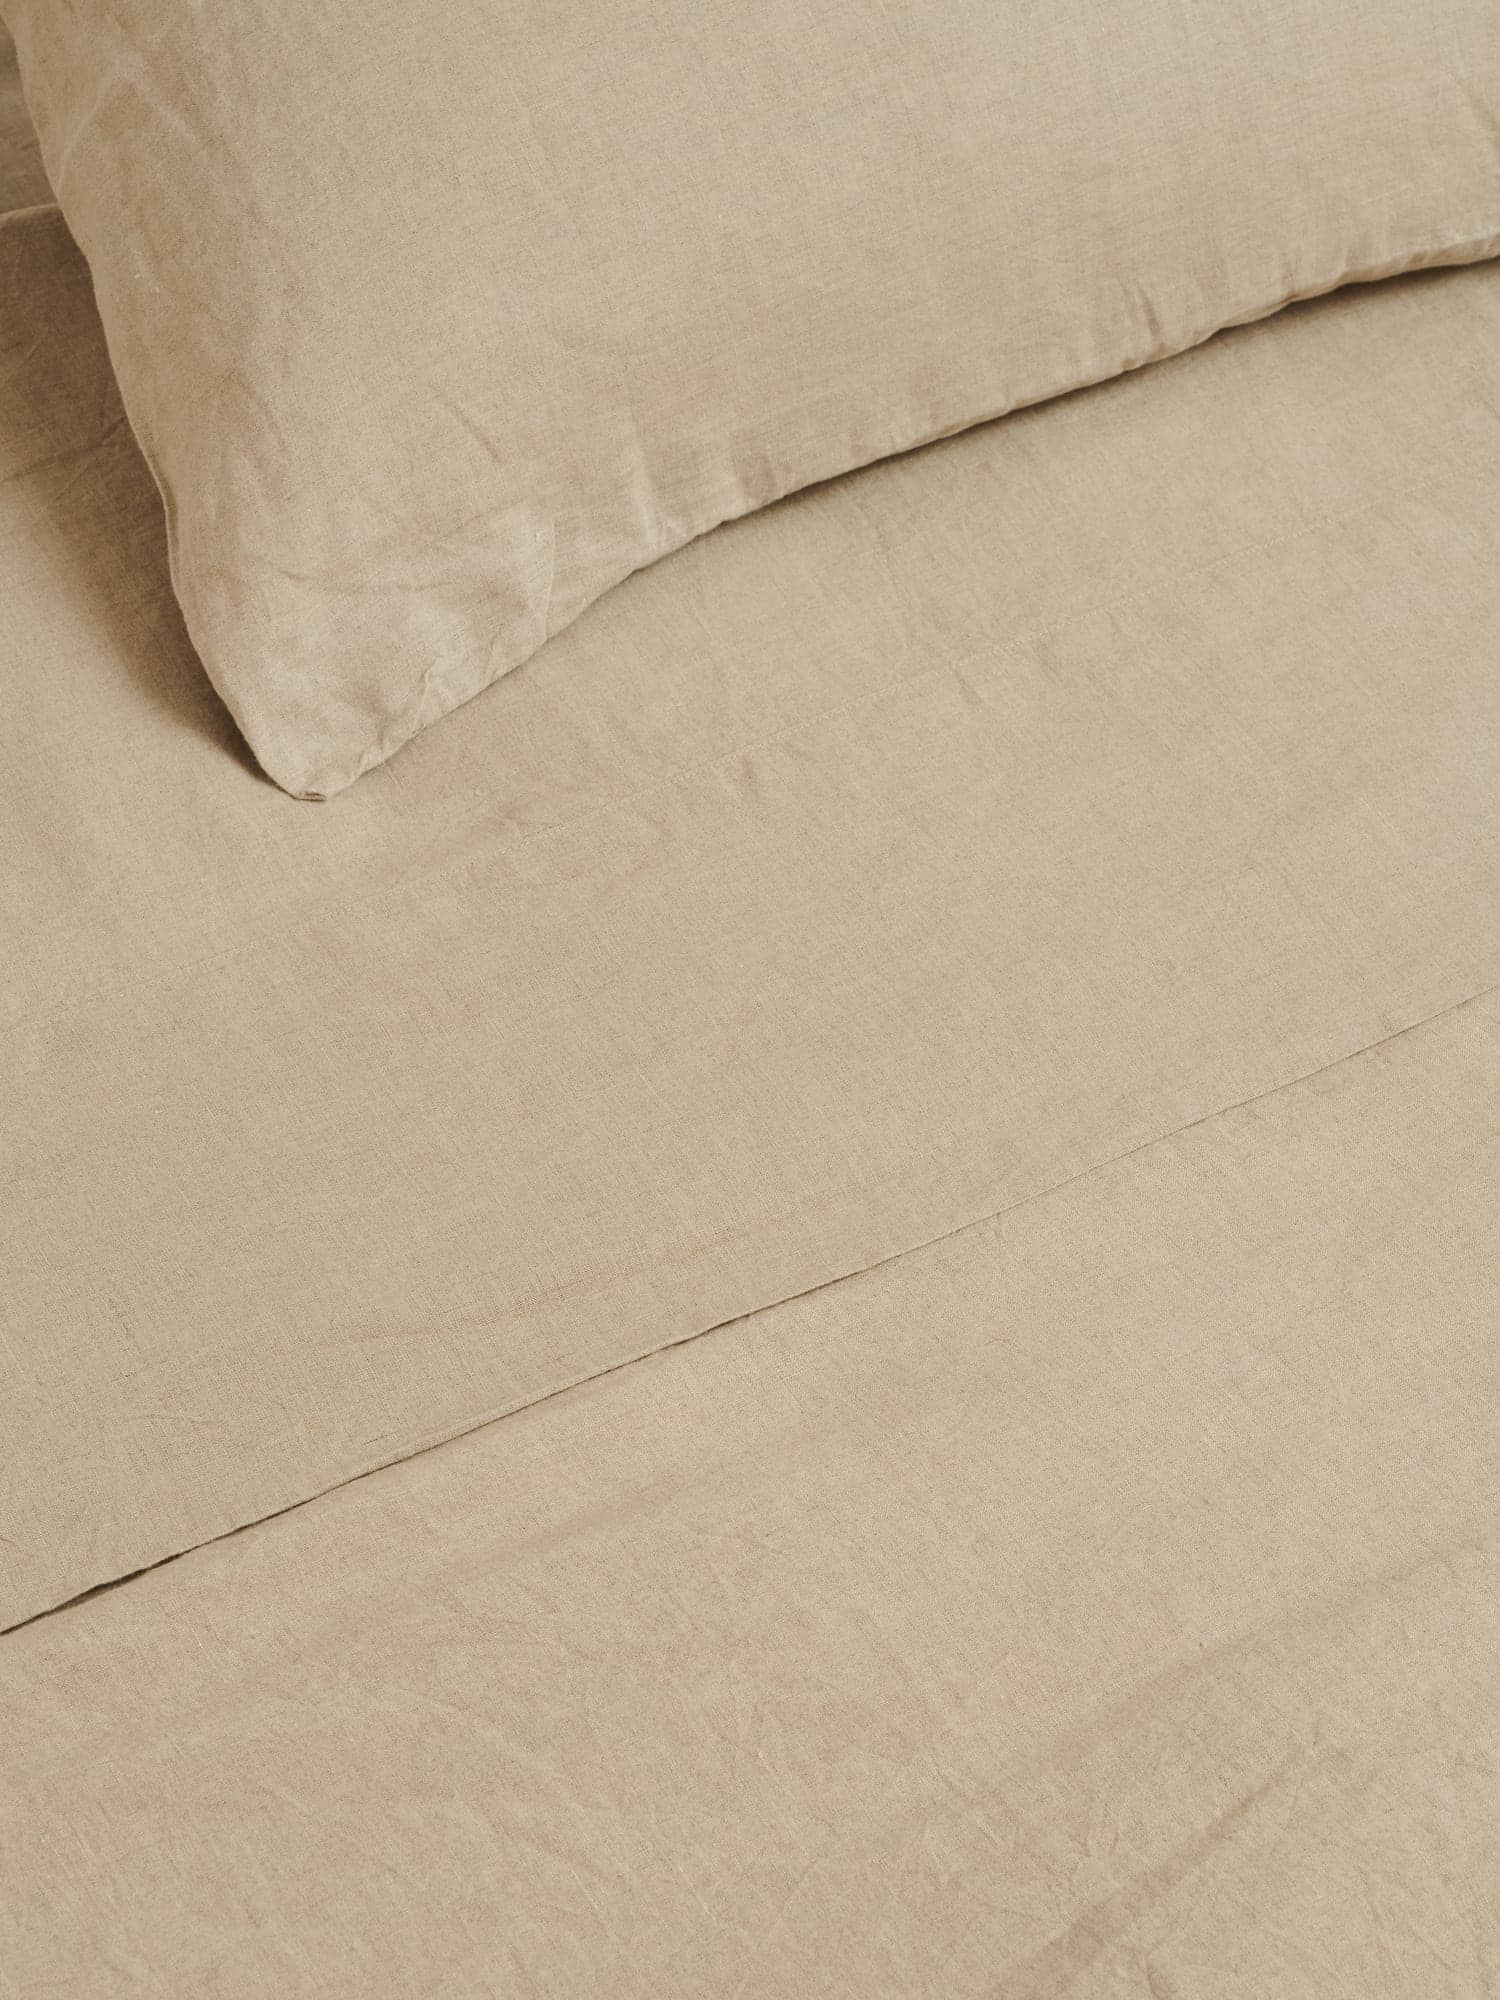 standard pillowcases in natural